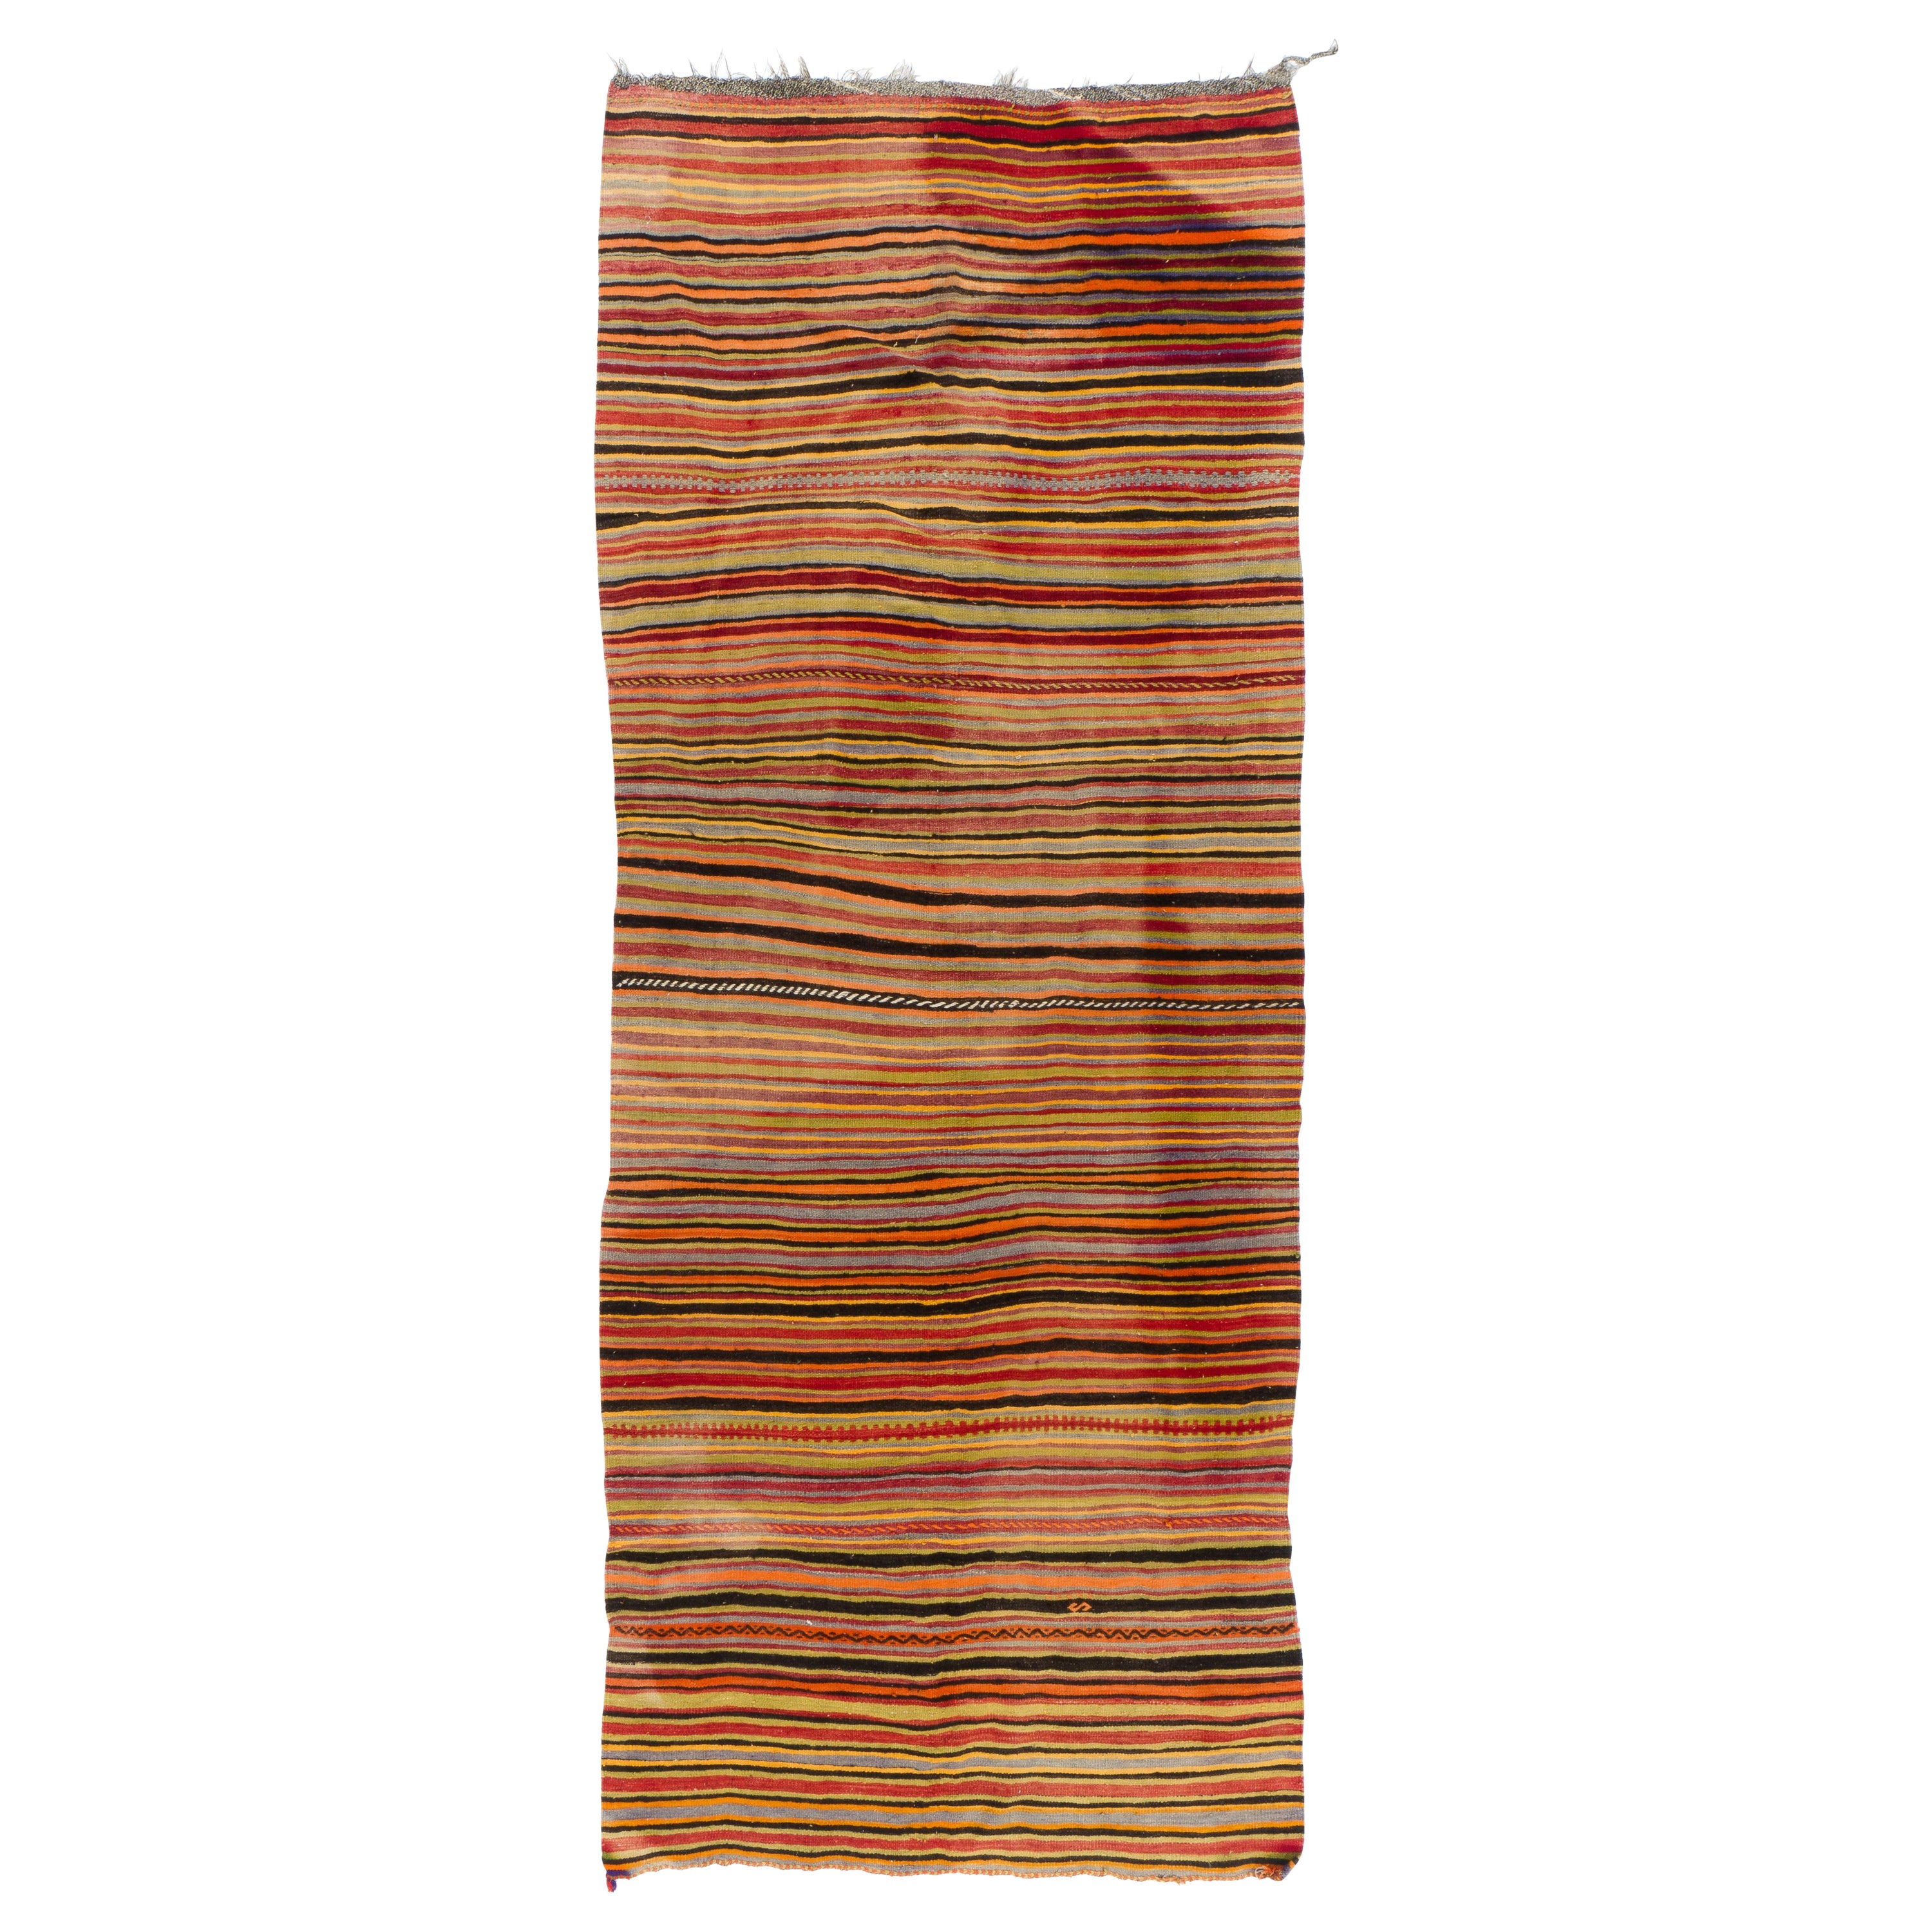 5.3x12.8 ft Hand-Woven Striped Vintage Anatolian Kilim "Flat-weave", Reversible For Sale